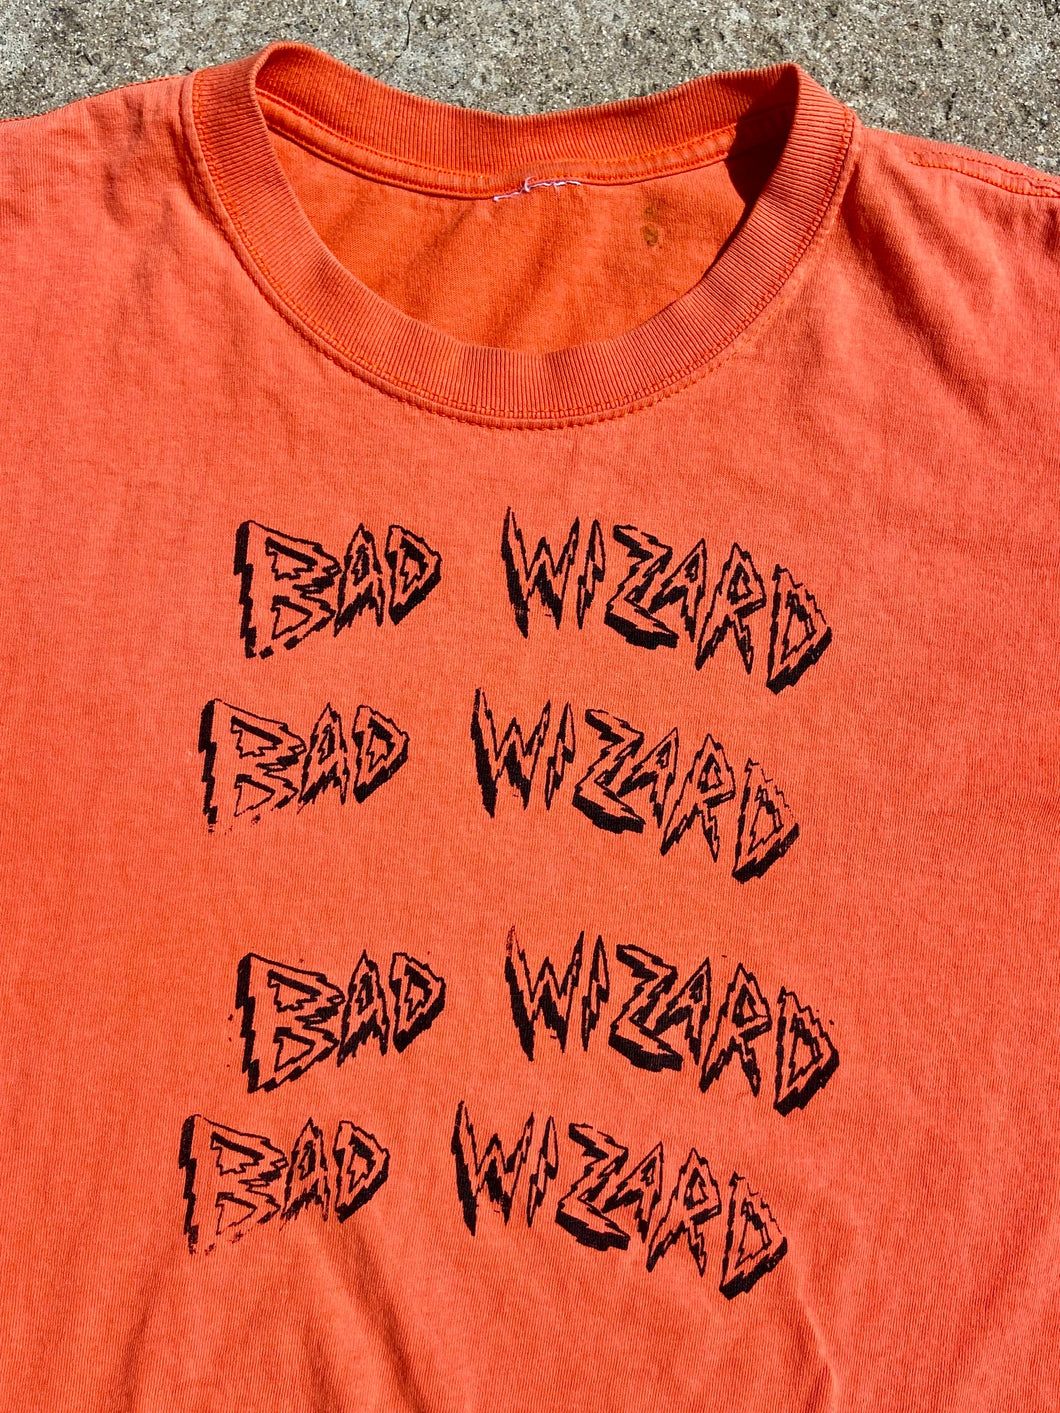 Vintage Bad Wizard band tshirt with surfing indian on back. Size Large.